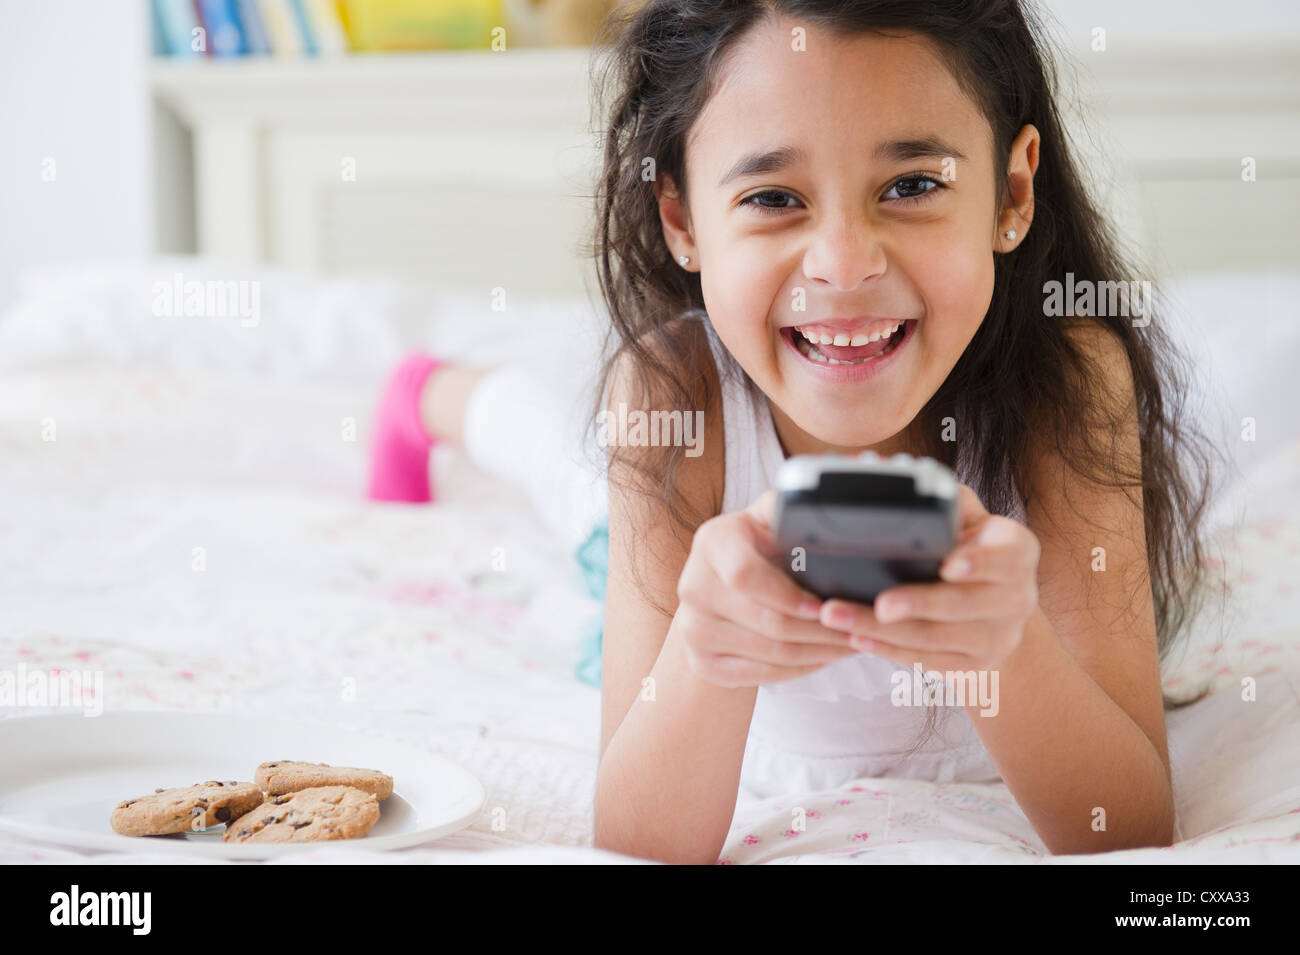 Mixed race girl using remote control Stock Photo